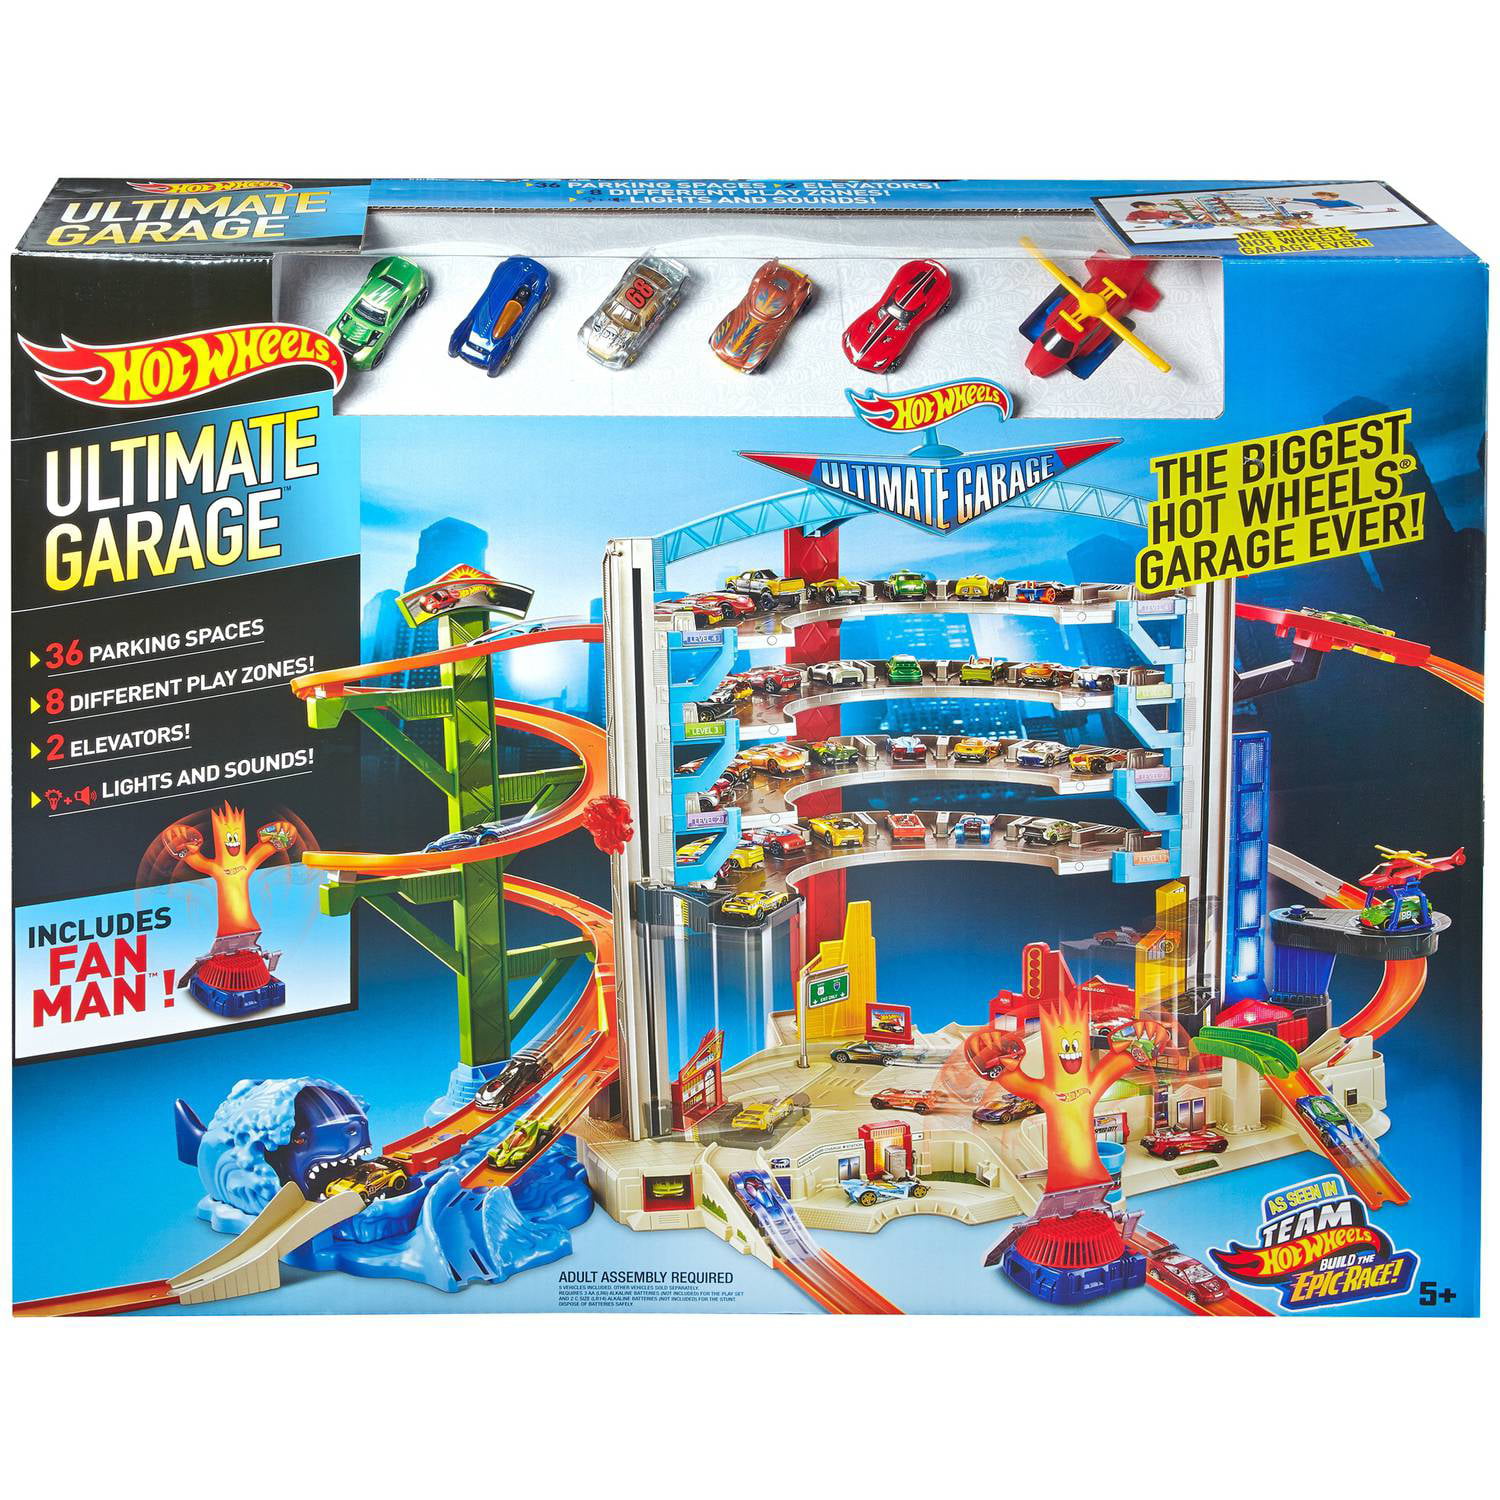 Hot Wheels Ultimate Garage & Play Zone - My Boys and Their Toys